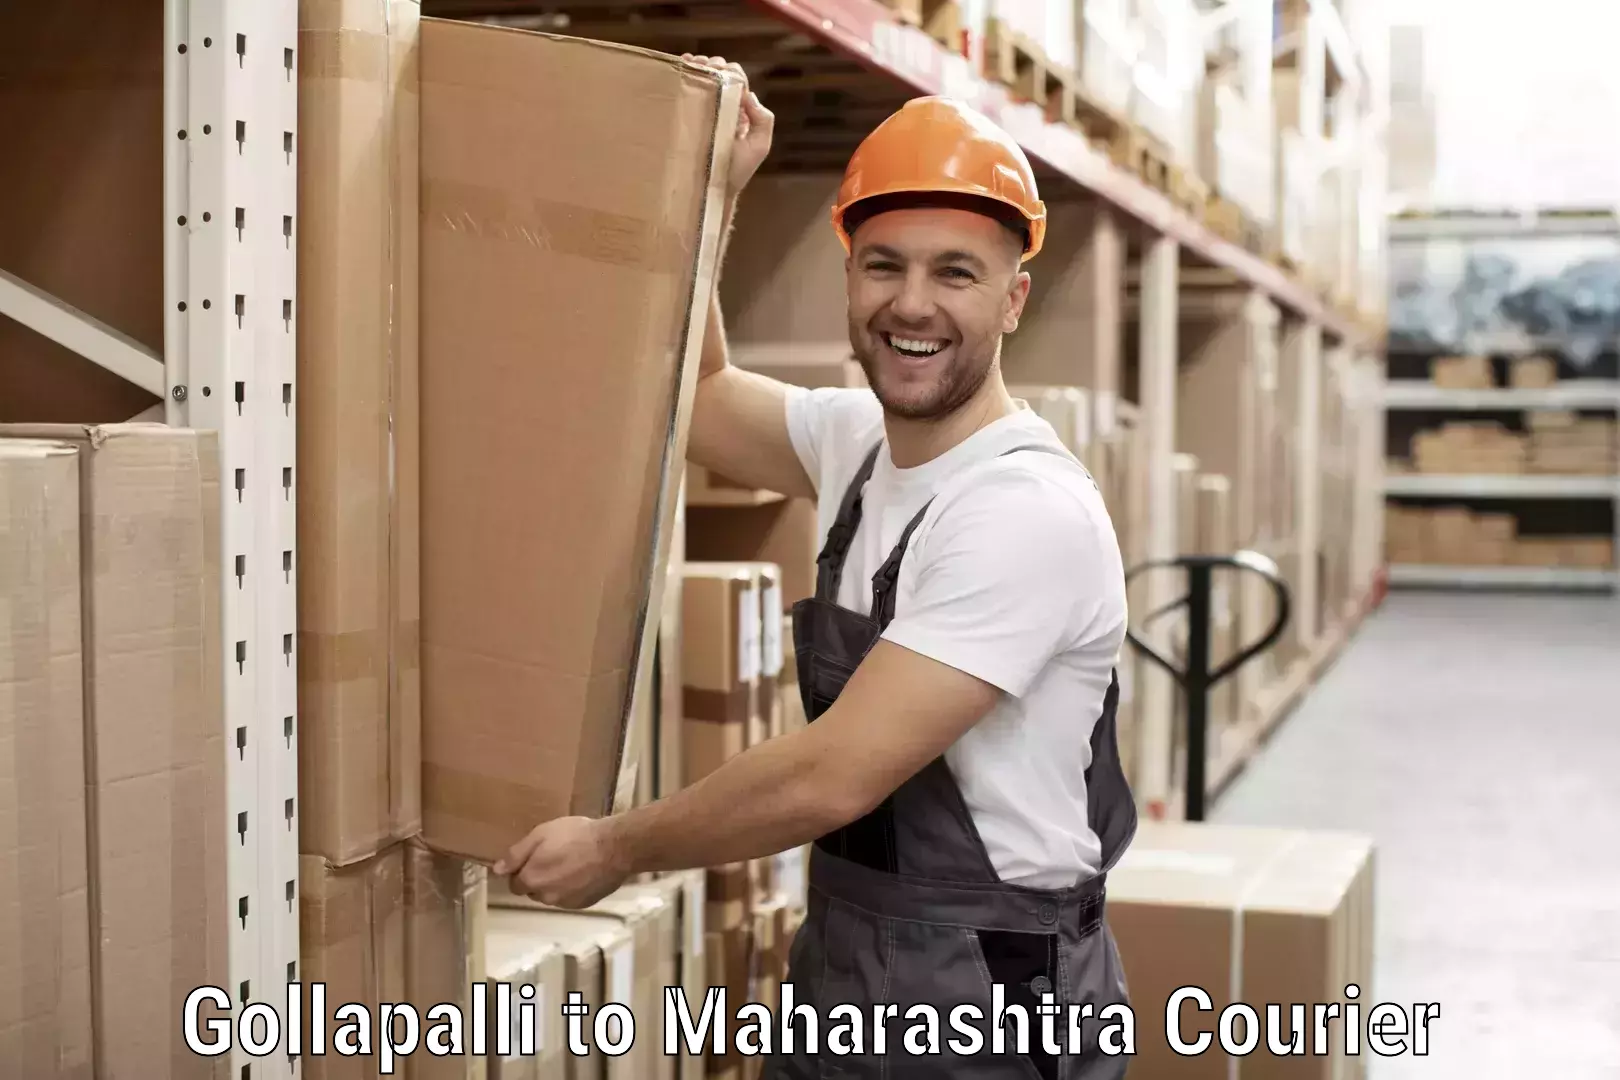 On-call courier service Gollapalli to Yavatmal